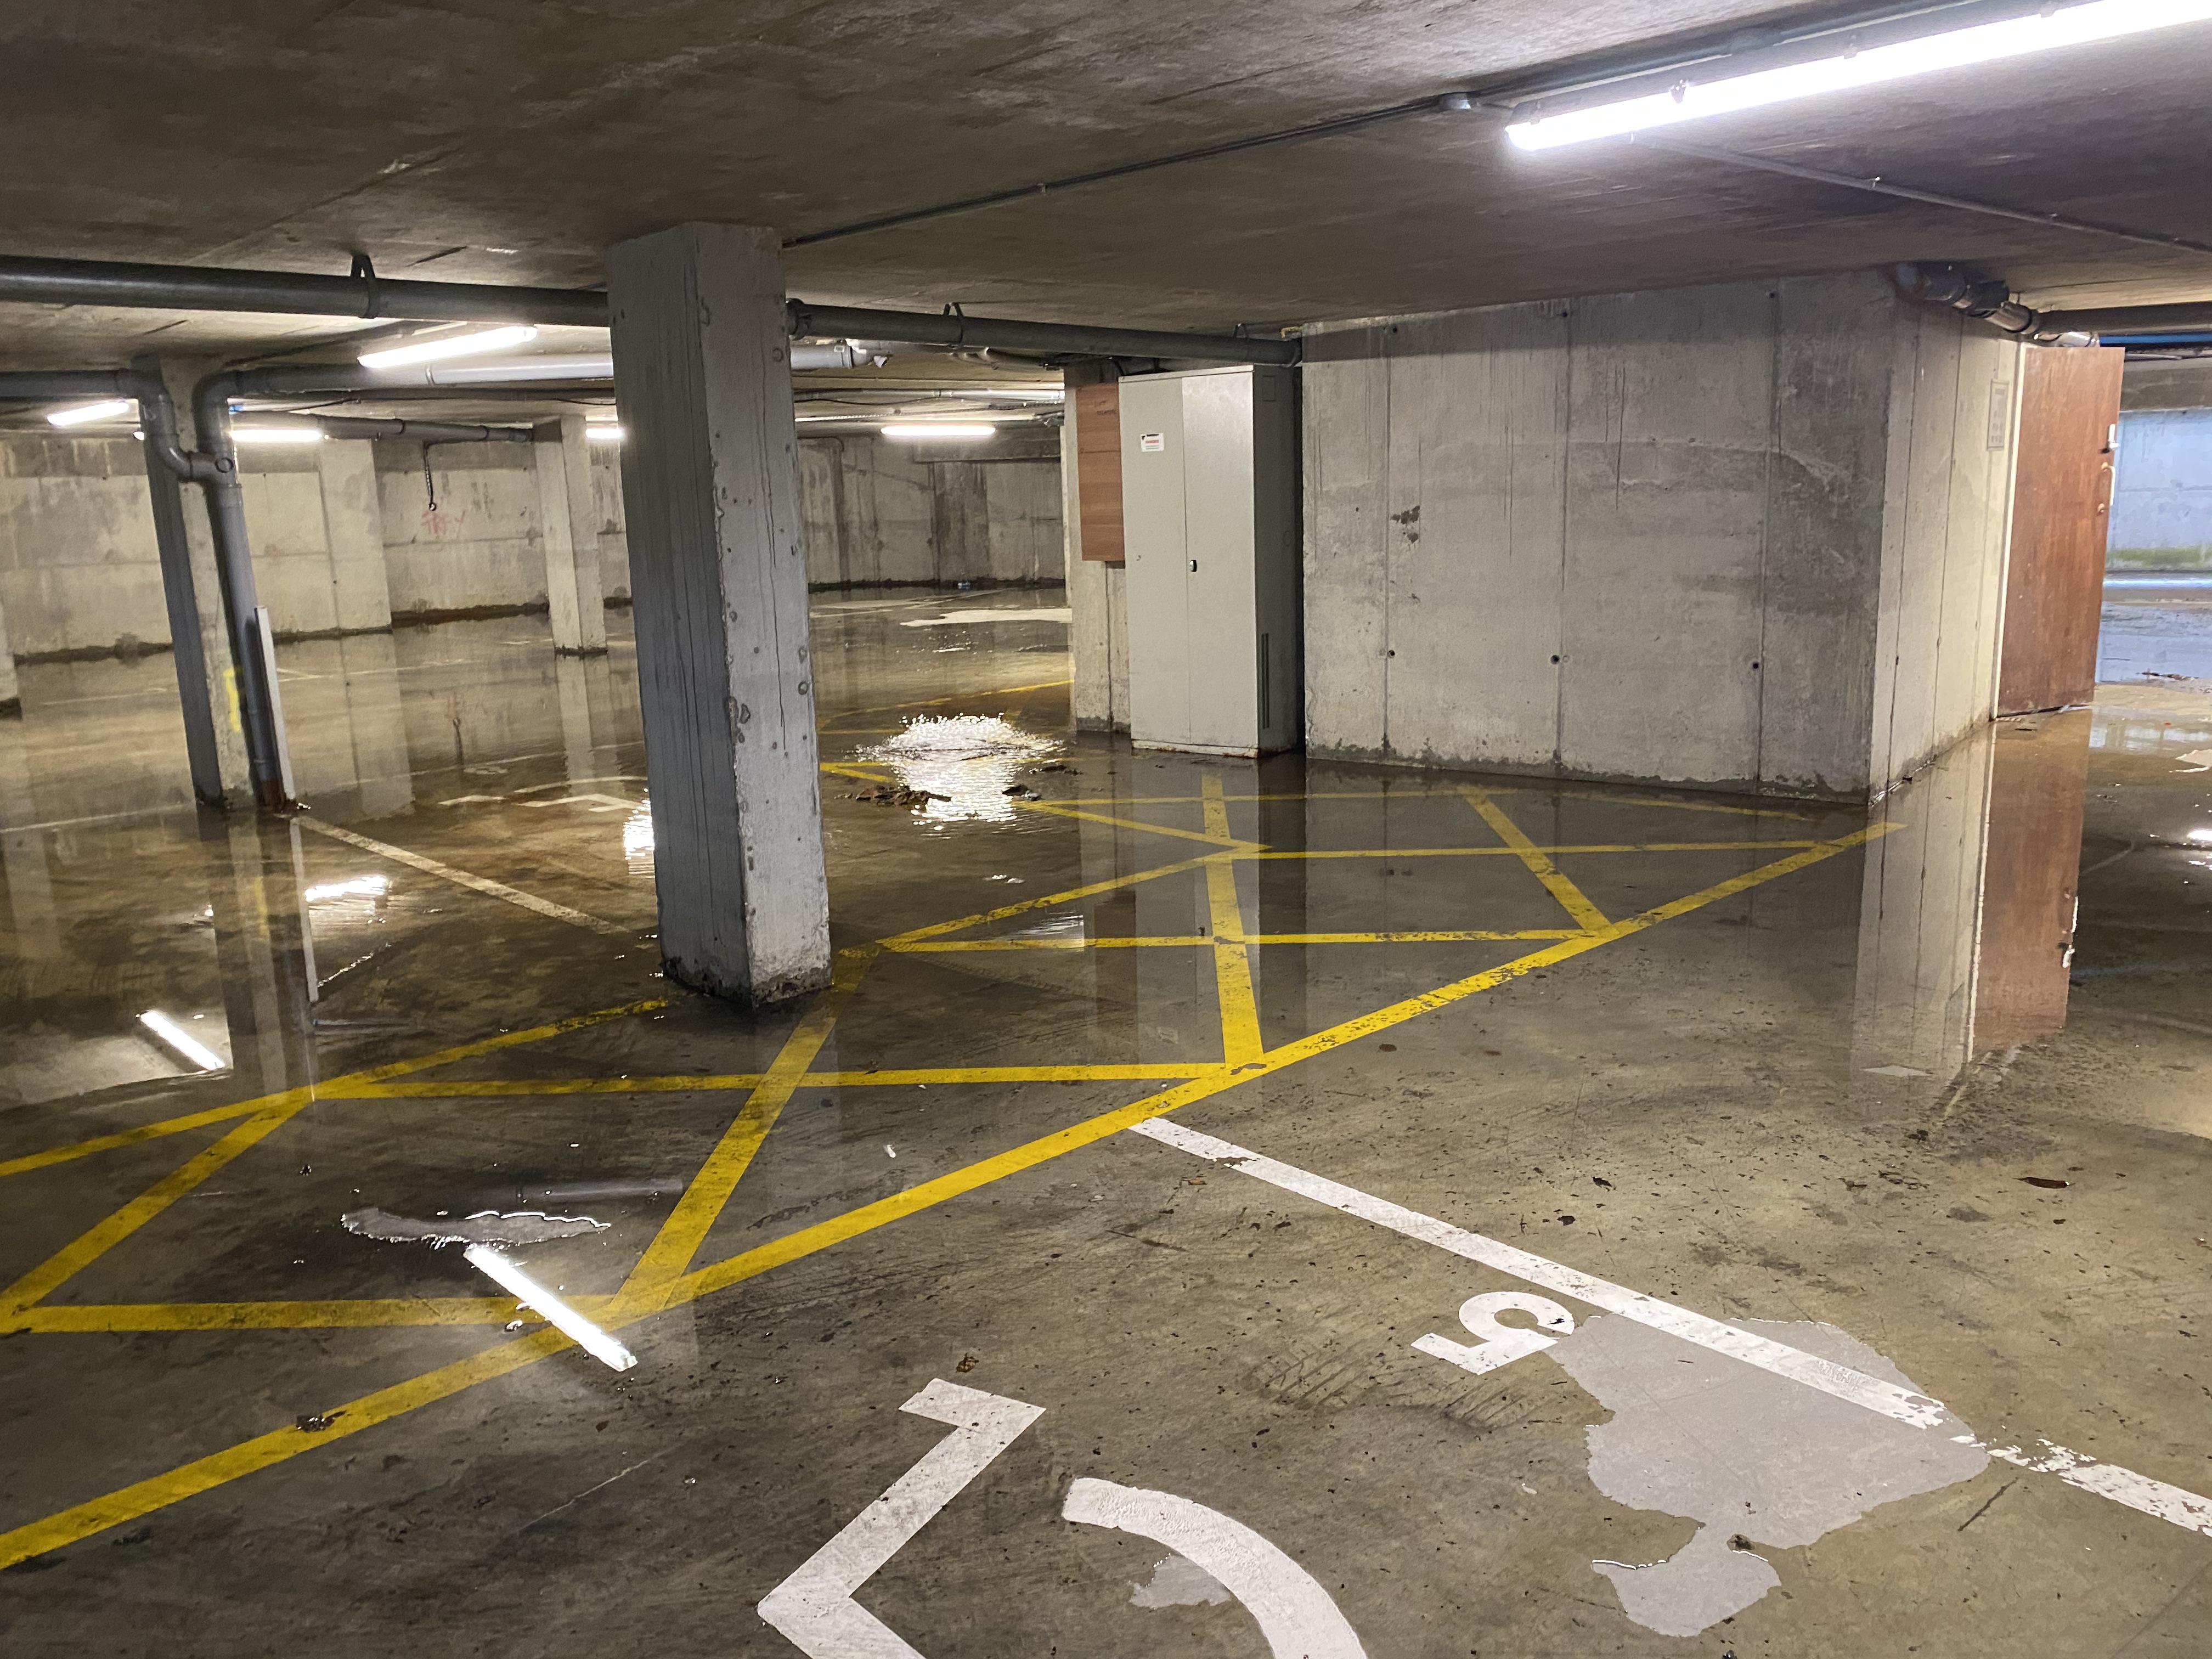 A flooded carpark due to blocked gully drains.